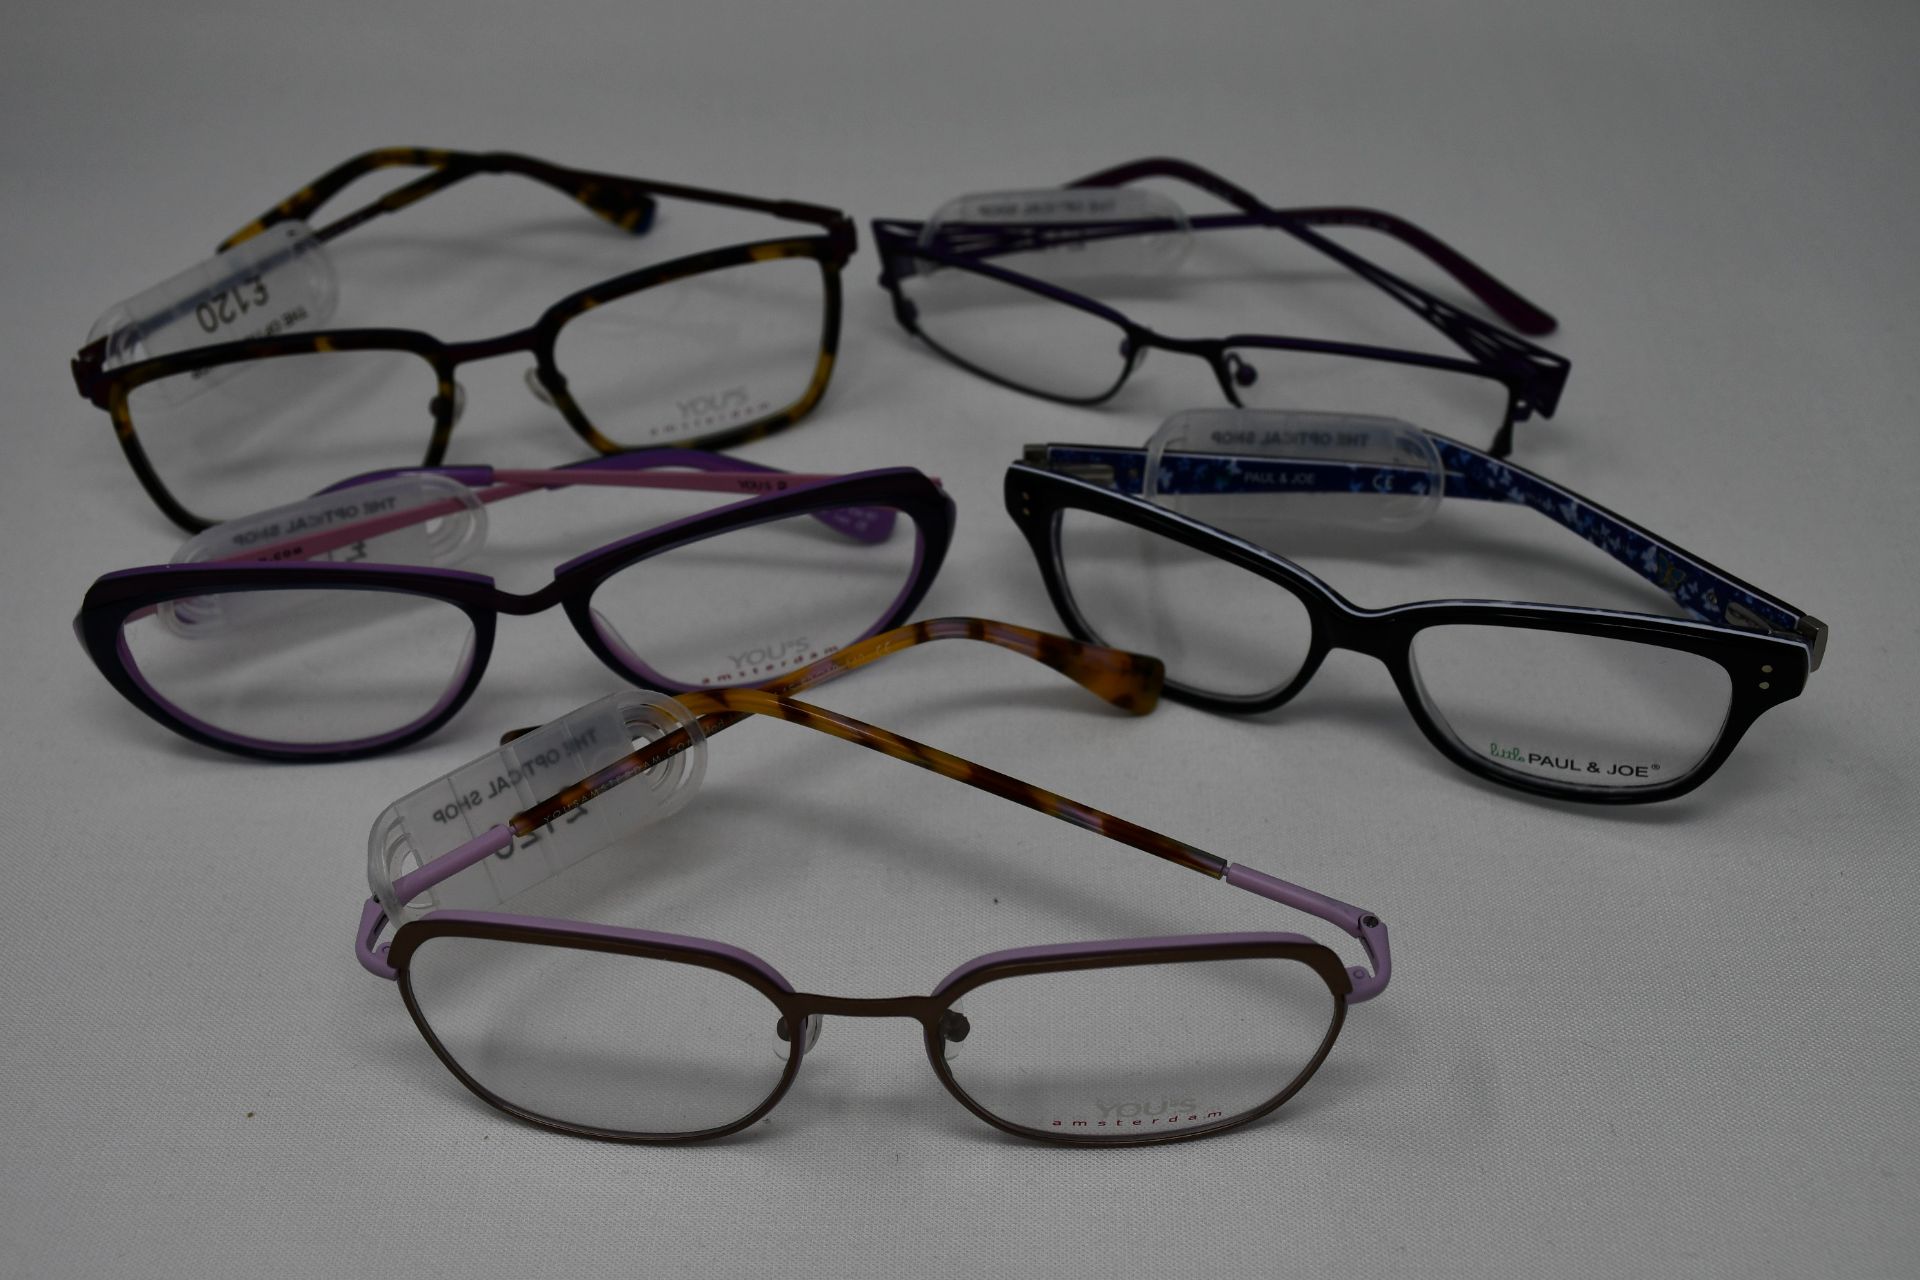 Five pairs of as new glasses frames with clear glass to include Yous, Paul & Joe and Maggy Rouff (